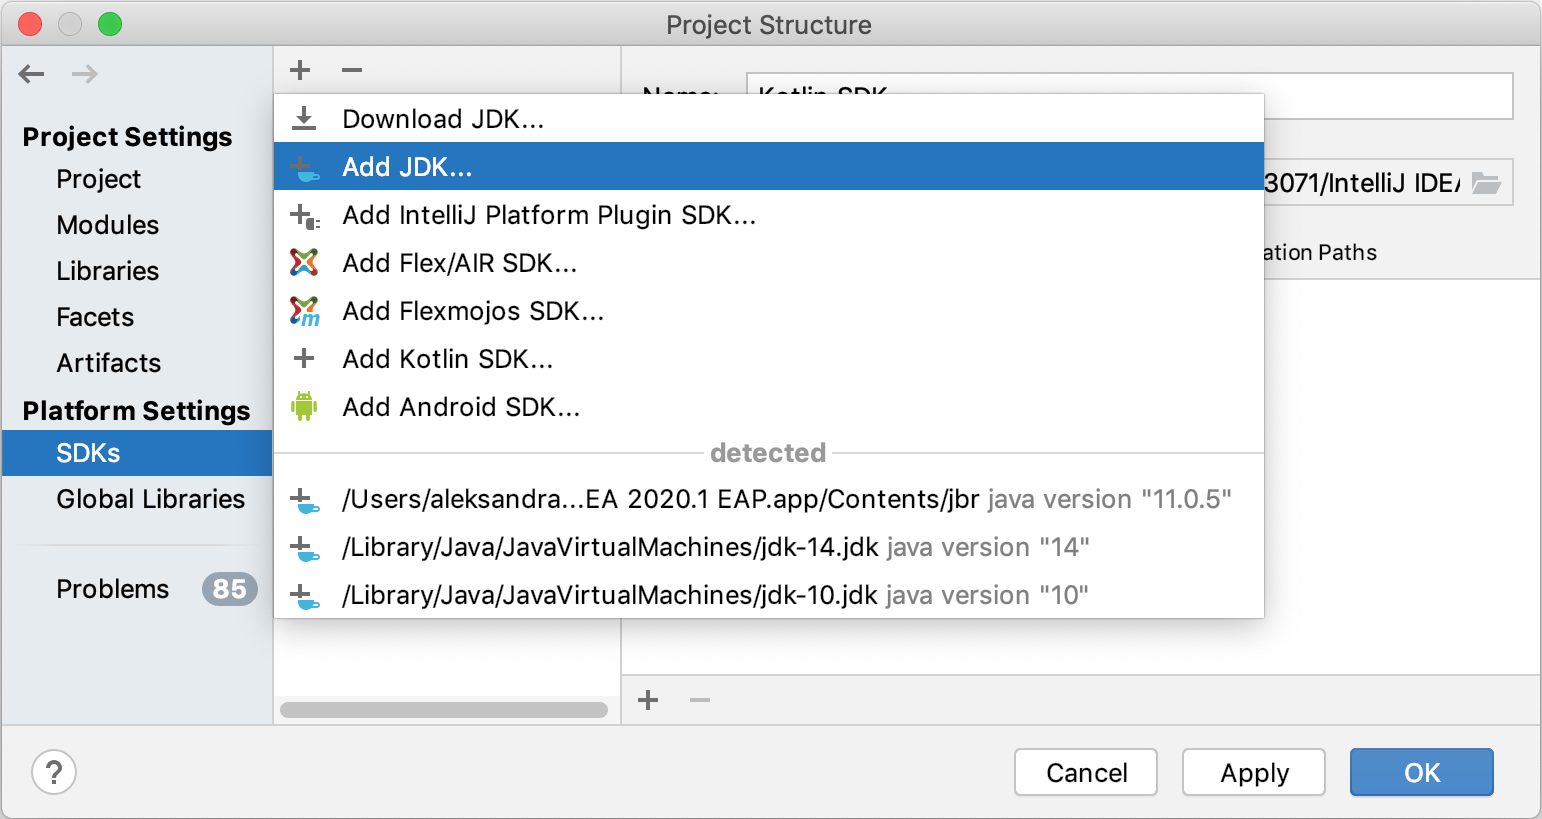 Show available SDKs in the Project Structure dialog